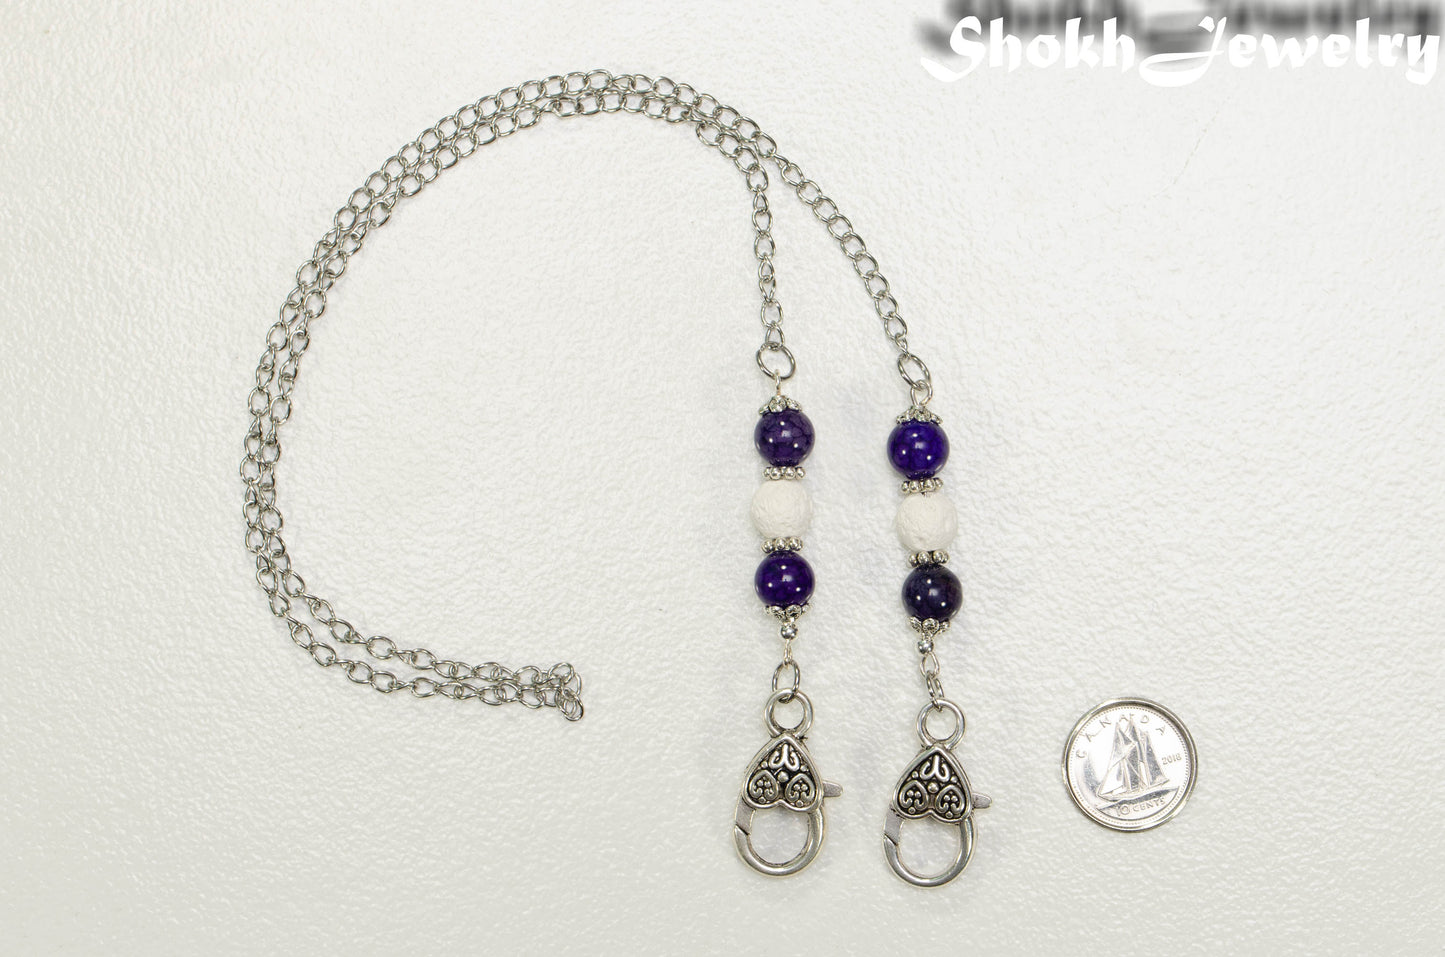 8mm Violet Agate and White Lava Stone Eyeglass Chain beside a dime.